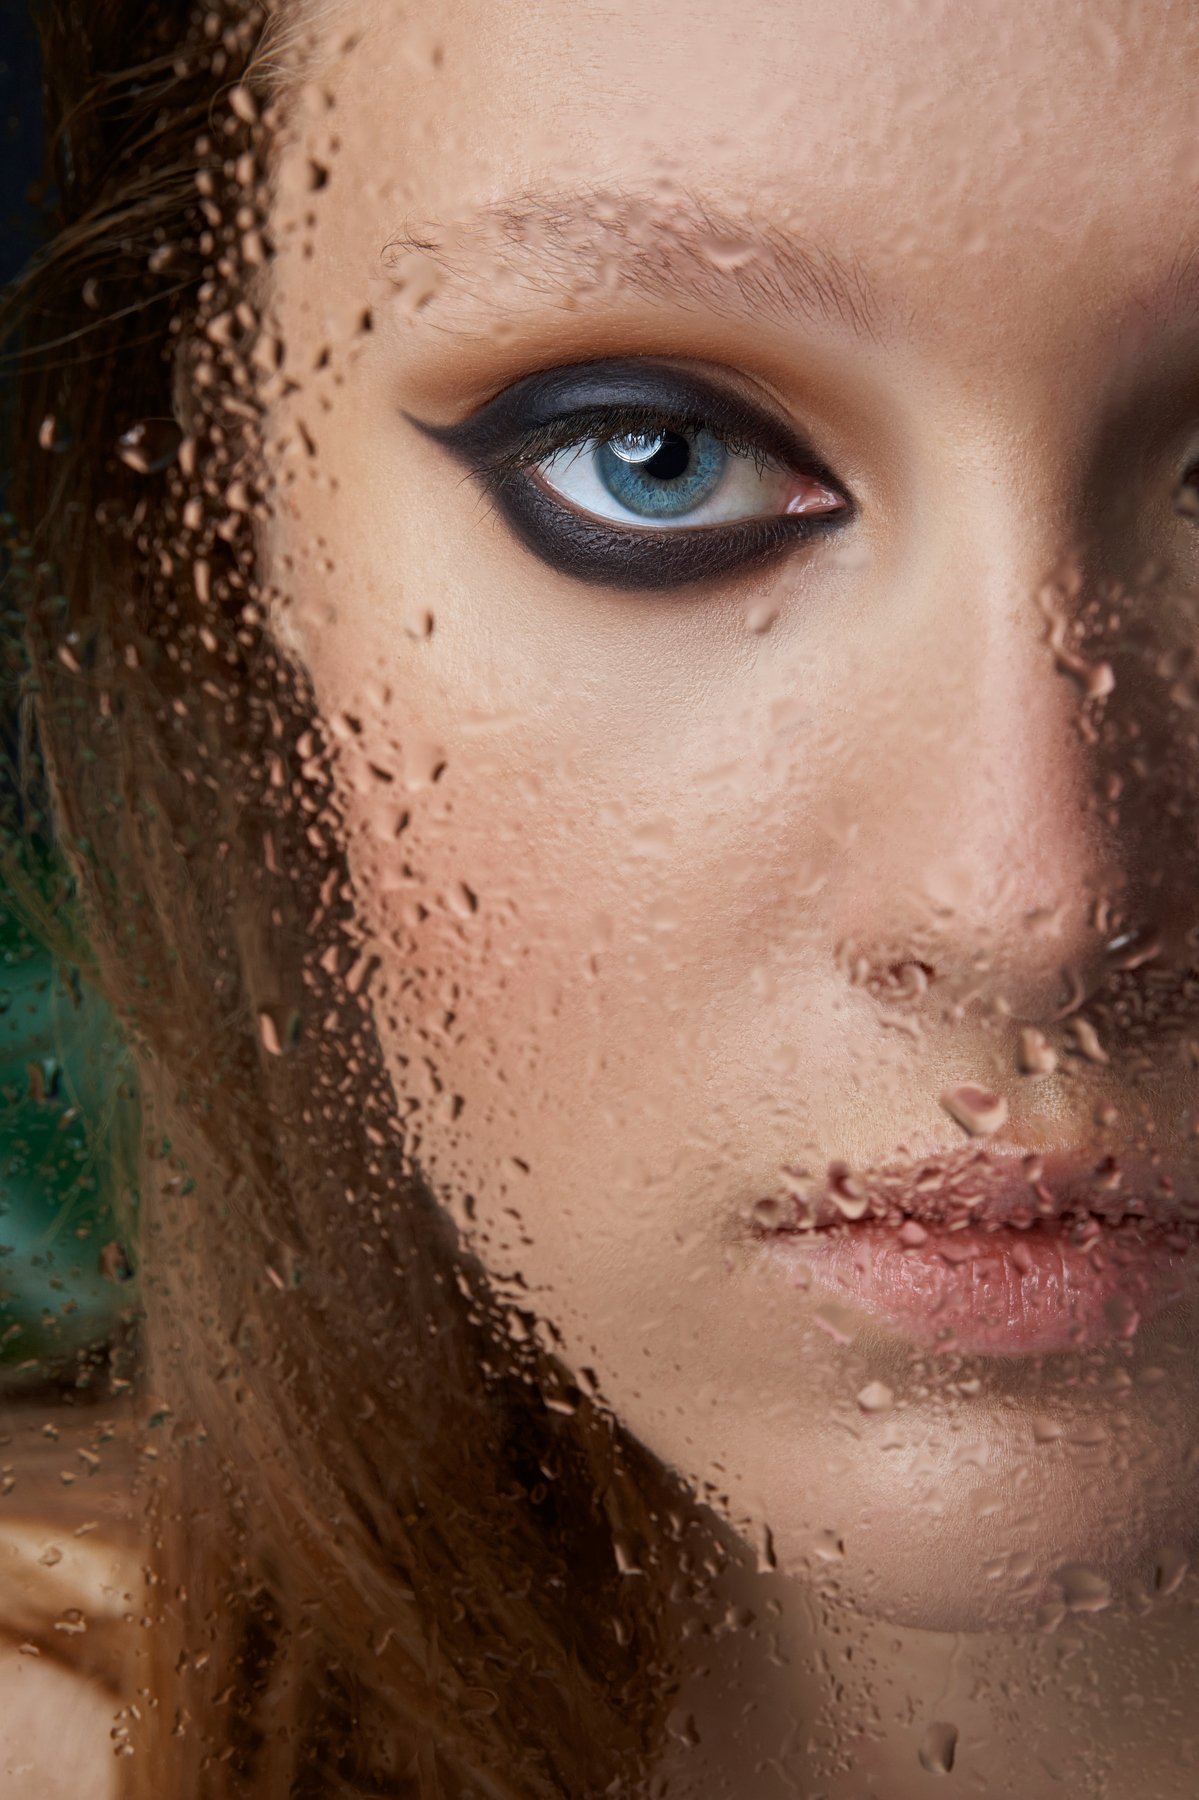 sony, beauty, close up, make up, drops, water, eyes, lips, retouch, Наташа Высоцкая